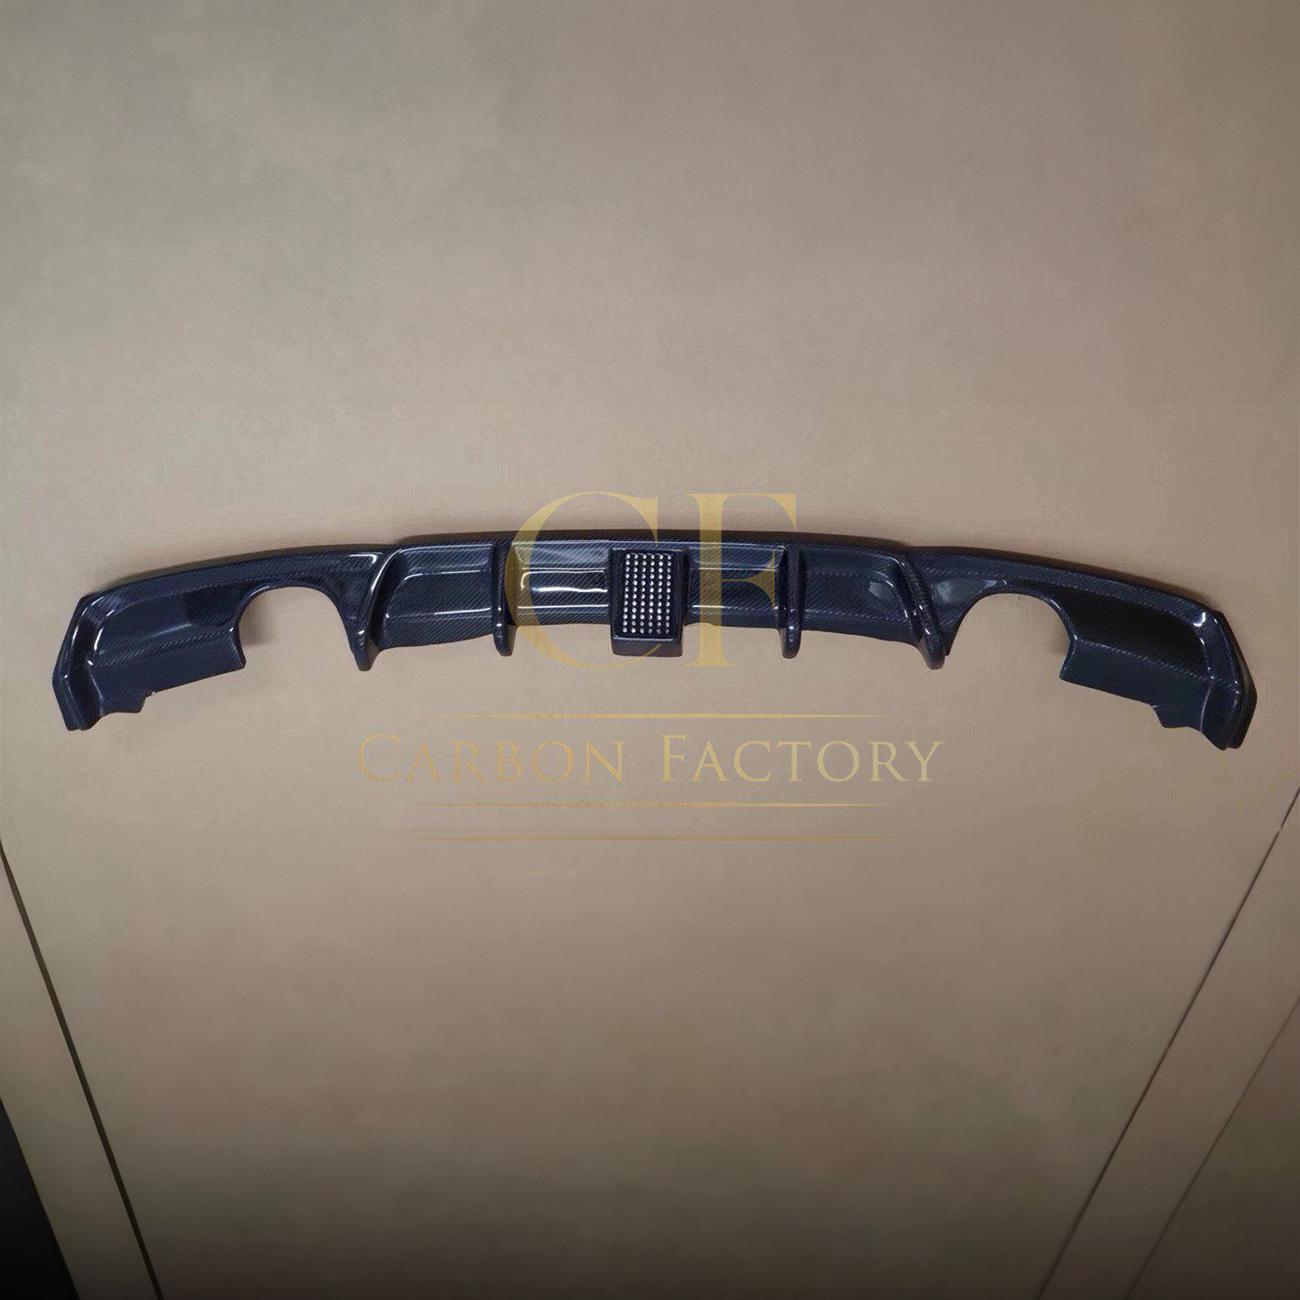 BMW F30 F31 3 Series Carbon Fibre Rear Diffuser with LED Light Dual Exhaust 12-19-Carbon Factory